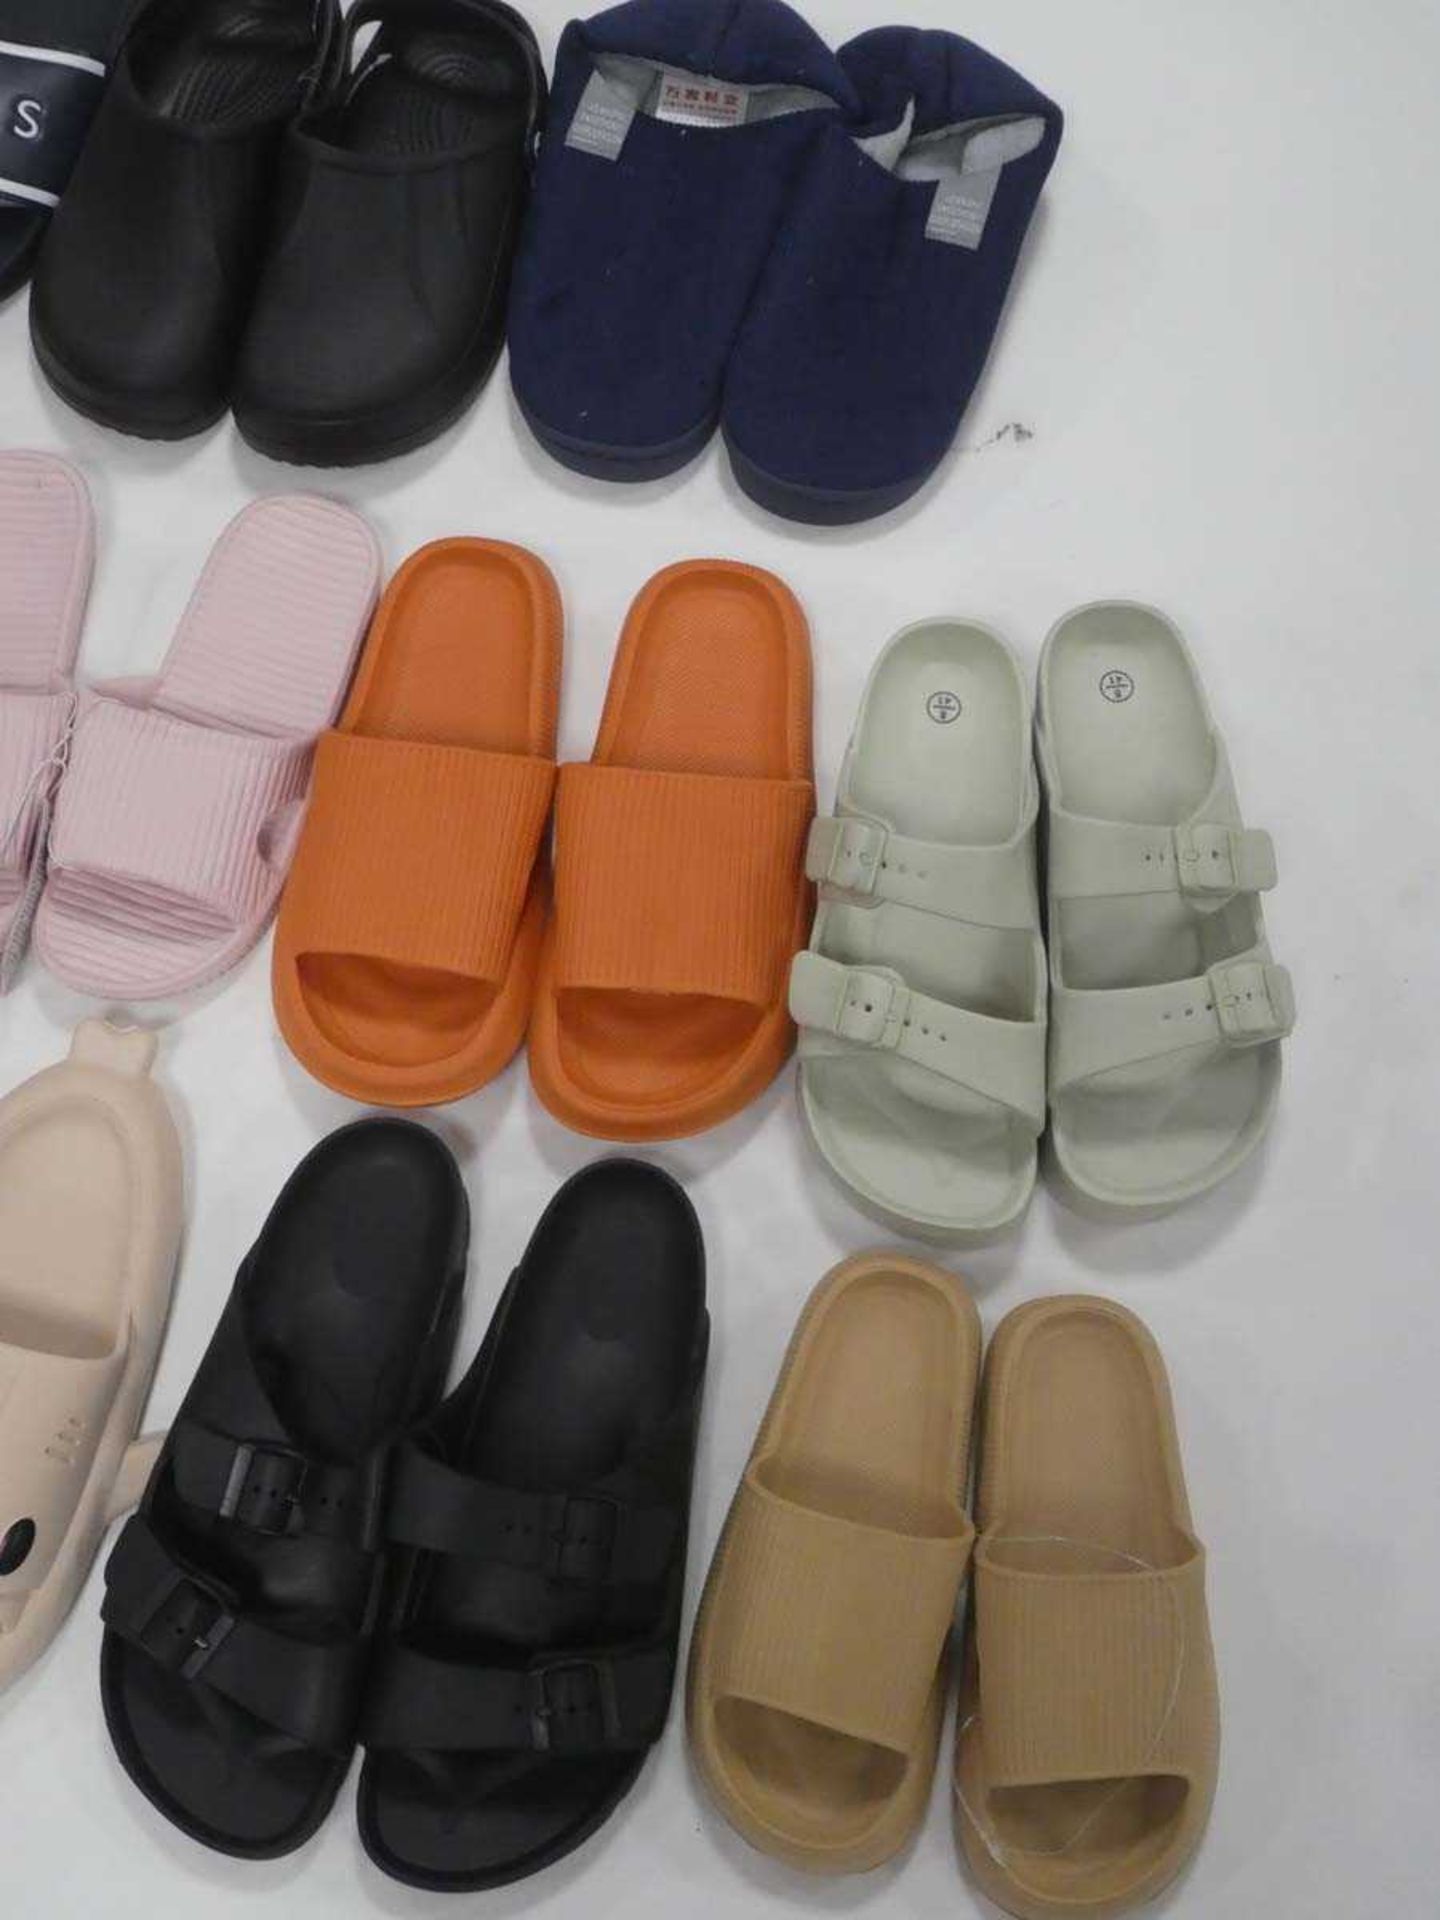 +VAT 11 Pairs of sliders in various styles and sizes - Image 3 of 3